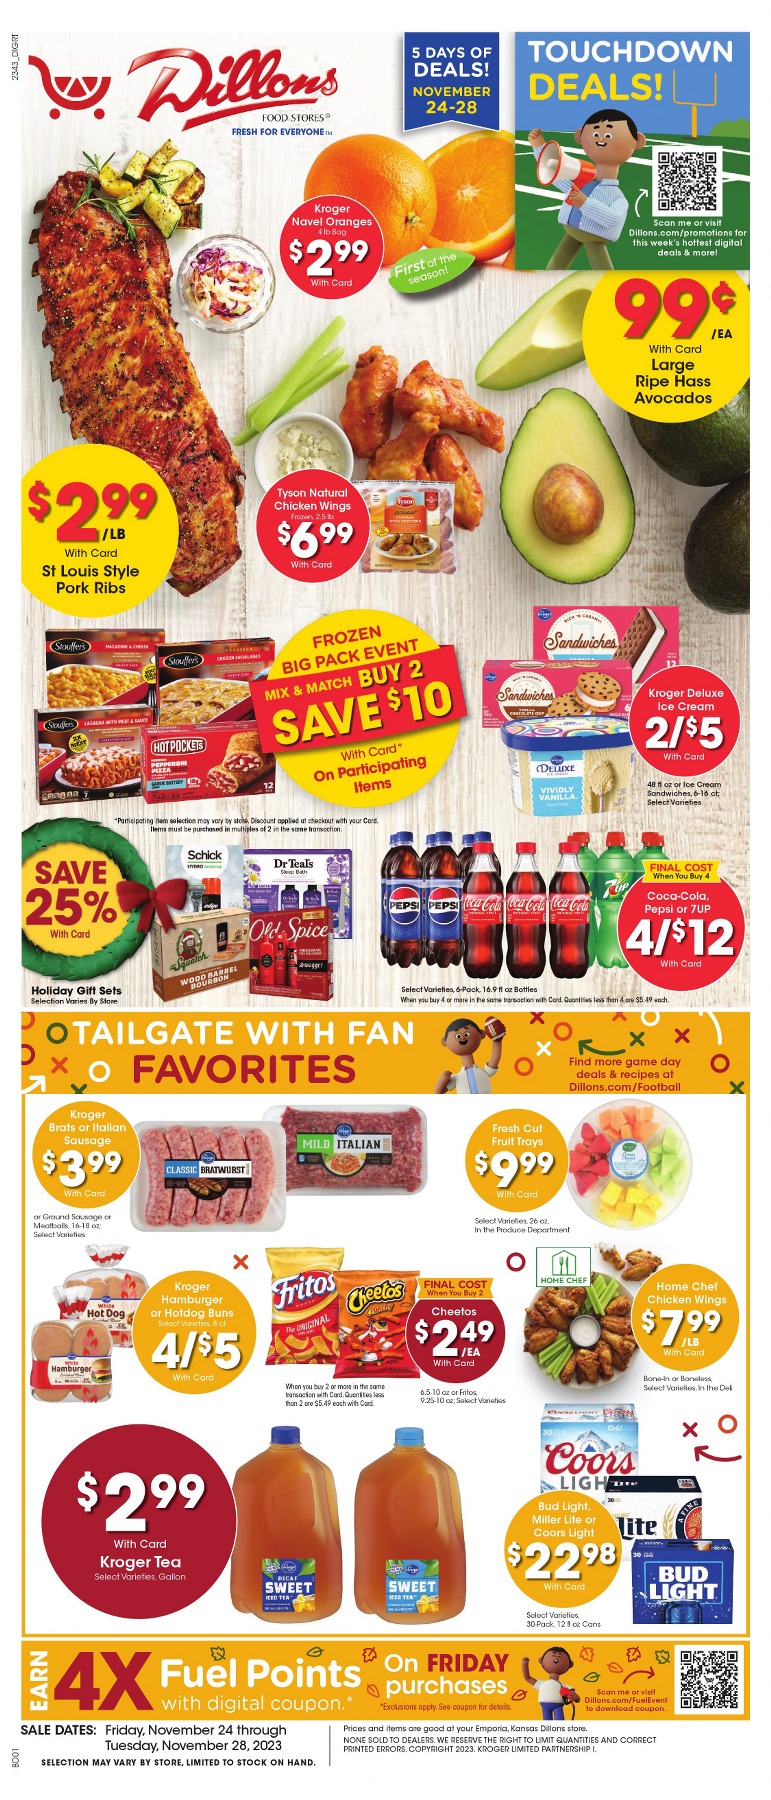 Dillons Black Friday Deals 2023 1 – dillons ad 1 2